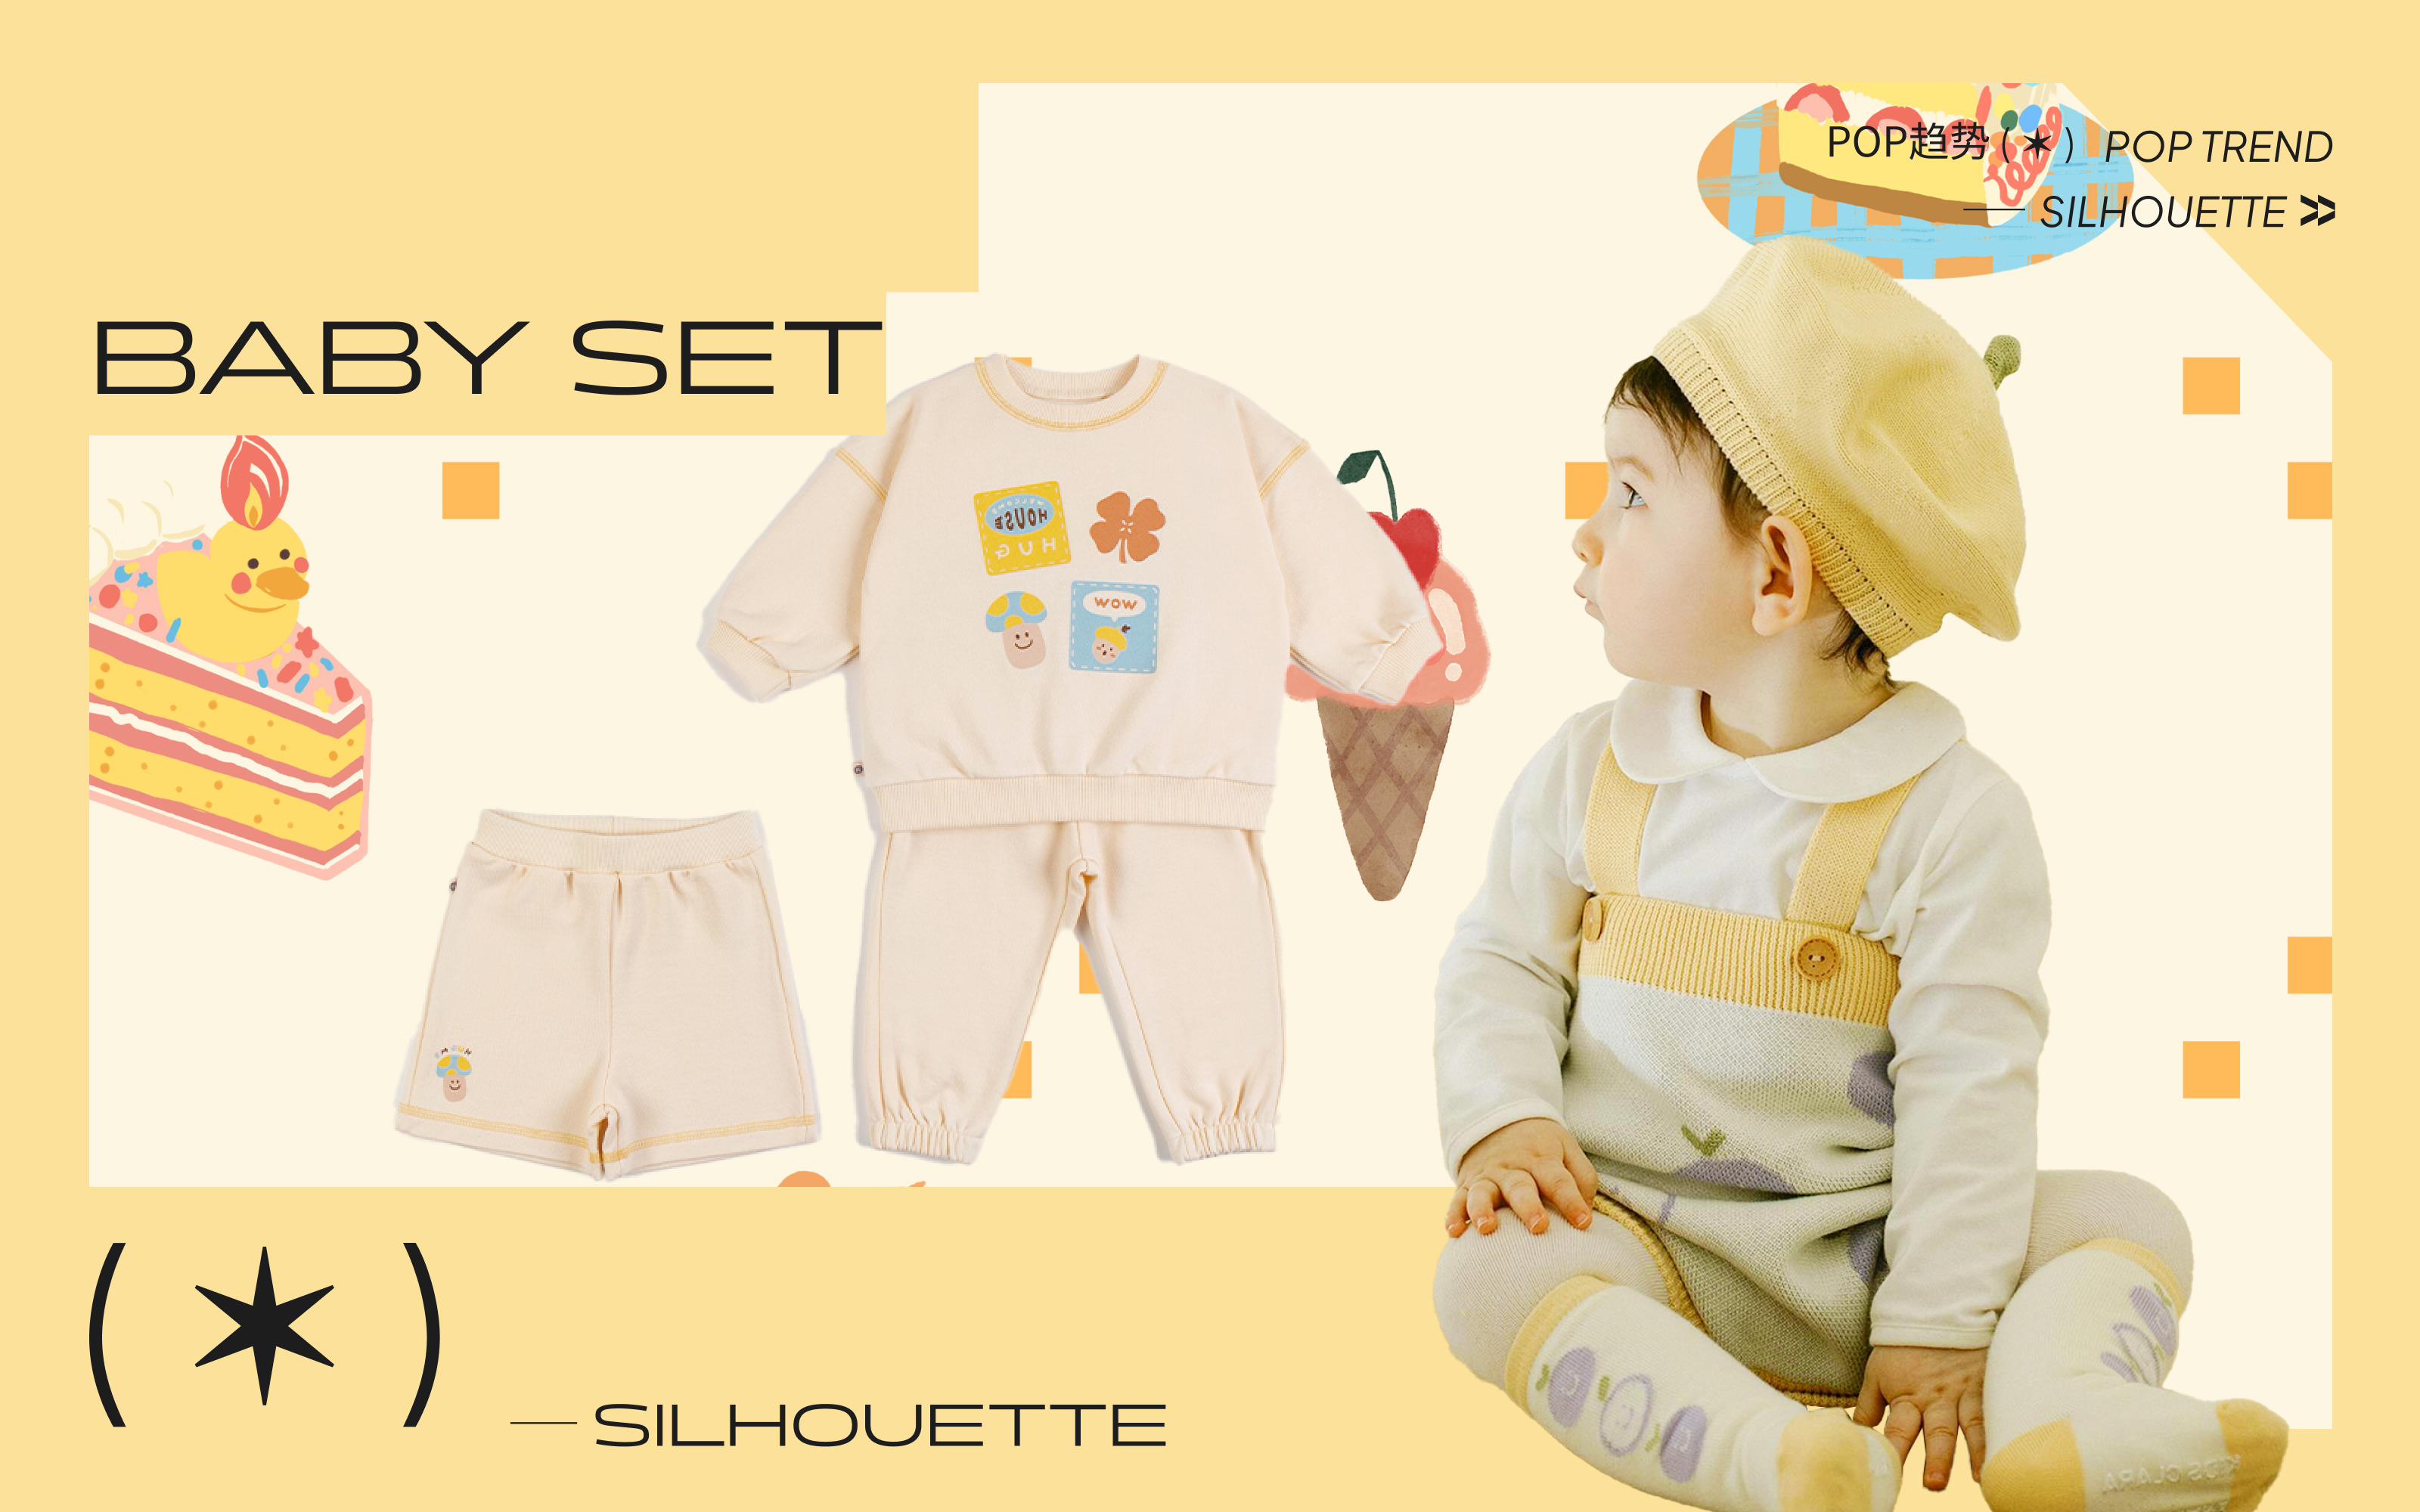 Baby Set -- The Silhouette Trend for Kidswear